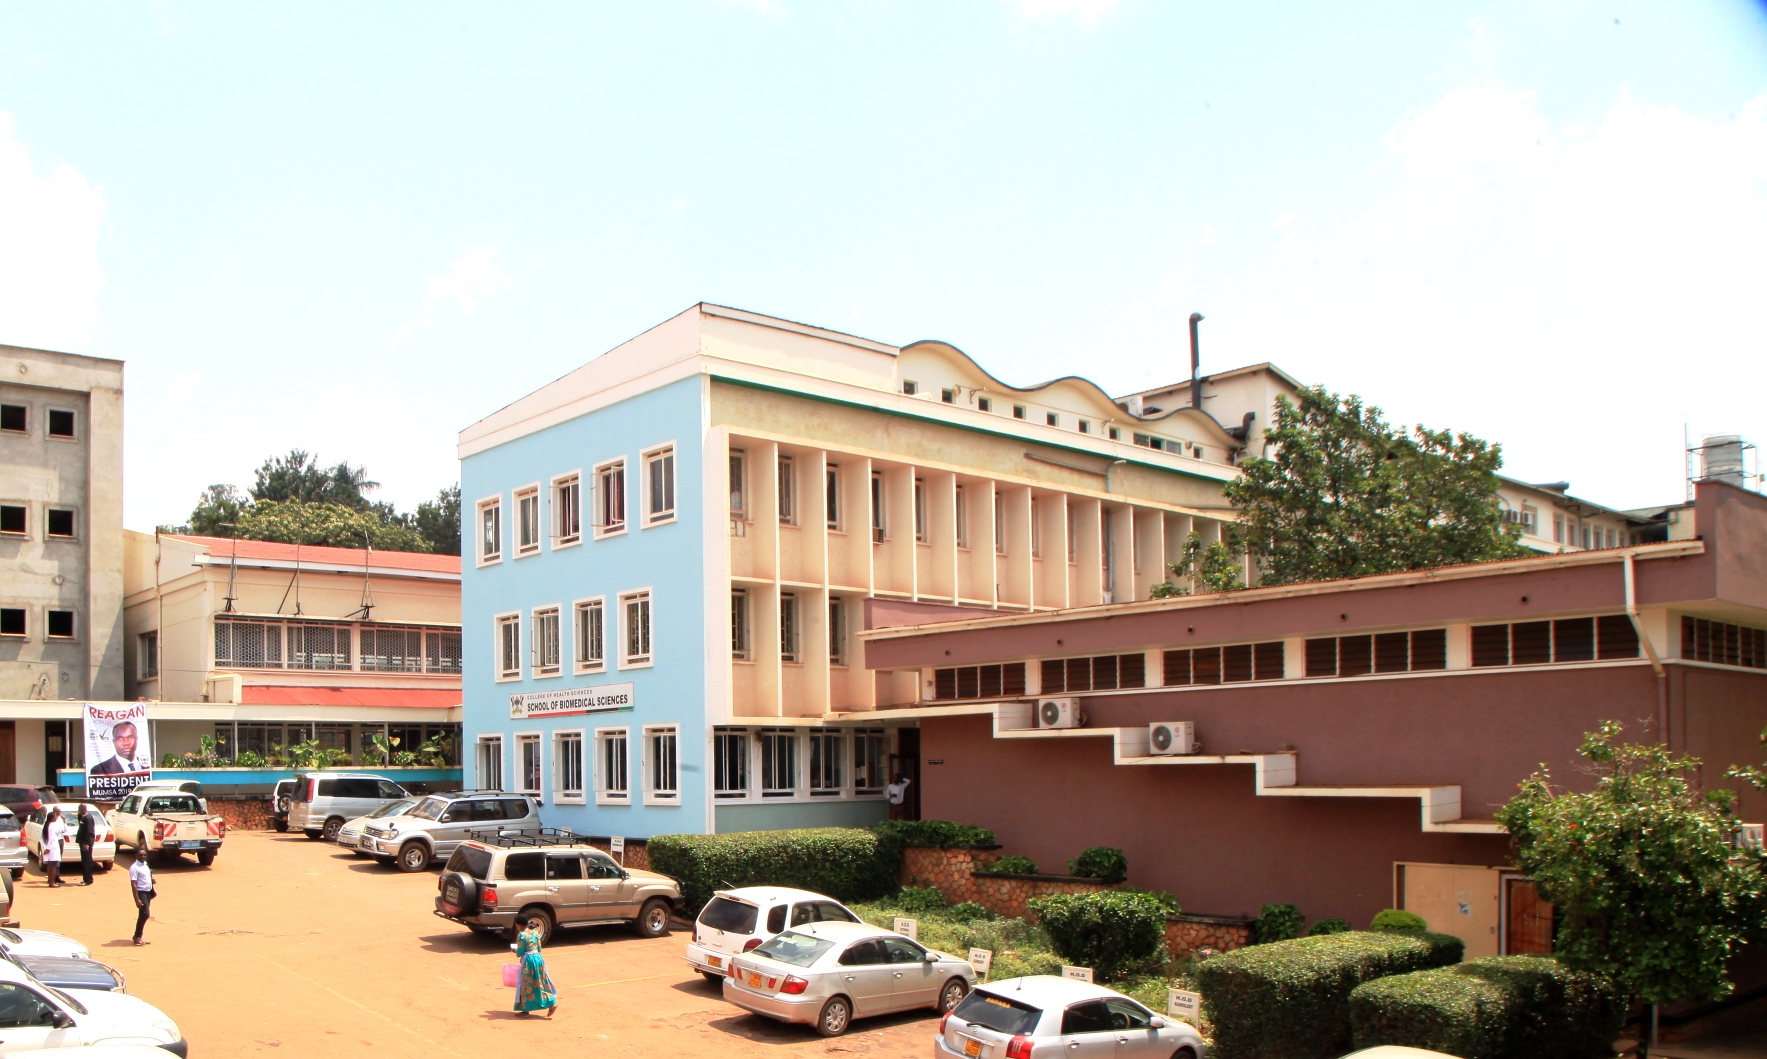 The Davies Lecture Theatre (Right), School of Biomedical Sciences (Blue) and other buildings at the College of Health Sciences (CHS), Mulago Campus, Makerere University, Kampala Uganda.